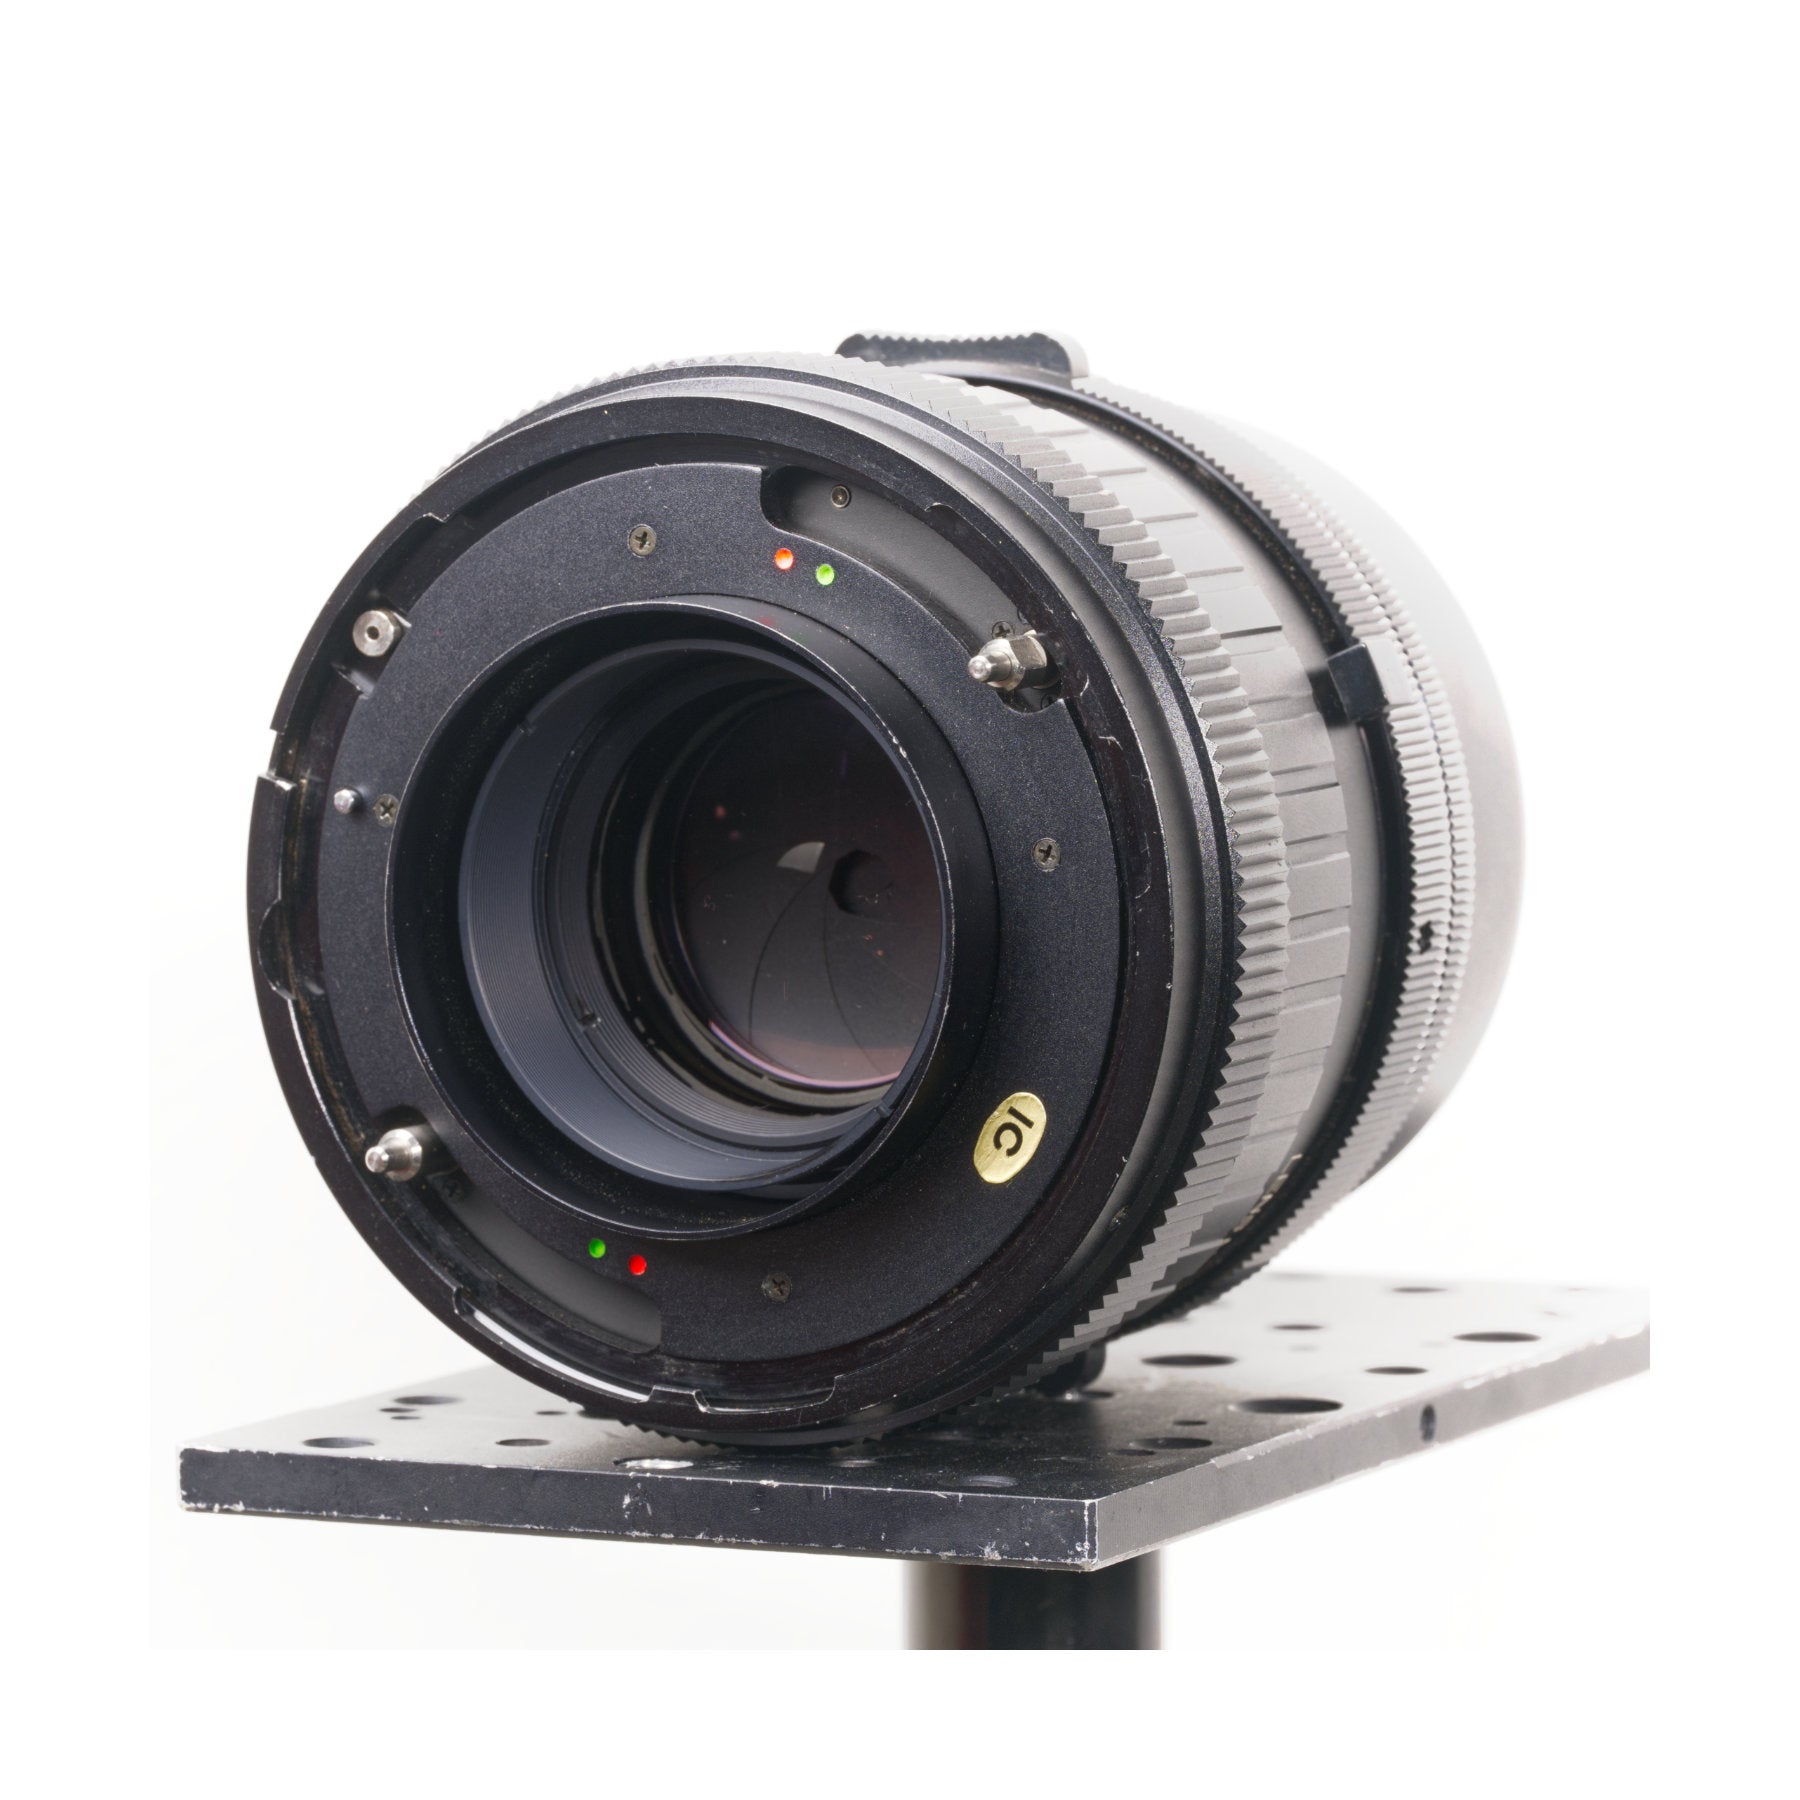 Buy second hand Mamiya 150mm f/4 Sekor SF C Lens for RB67 at Topic Store